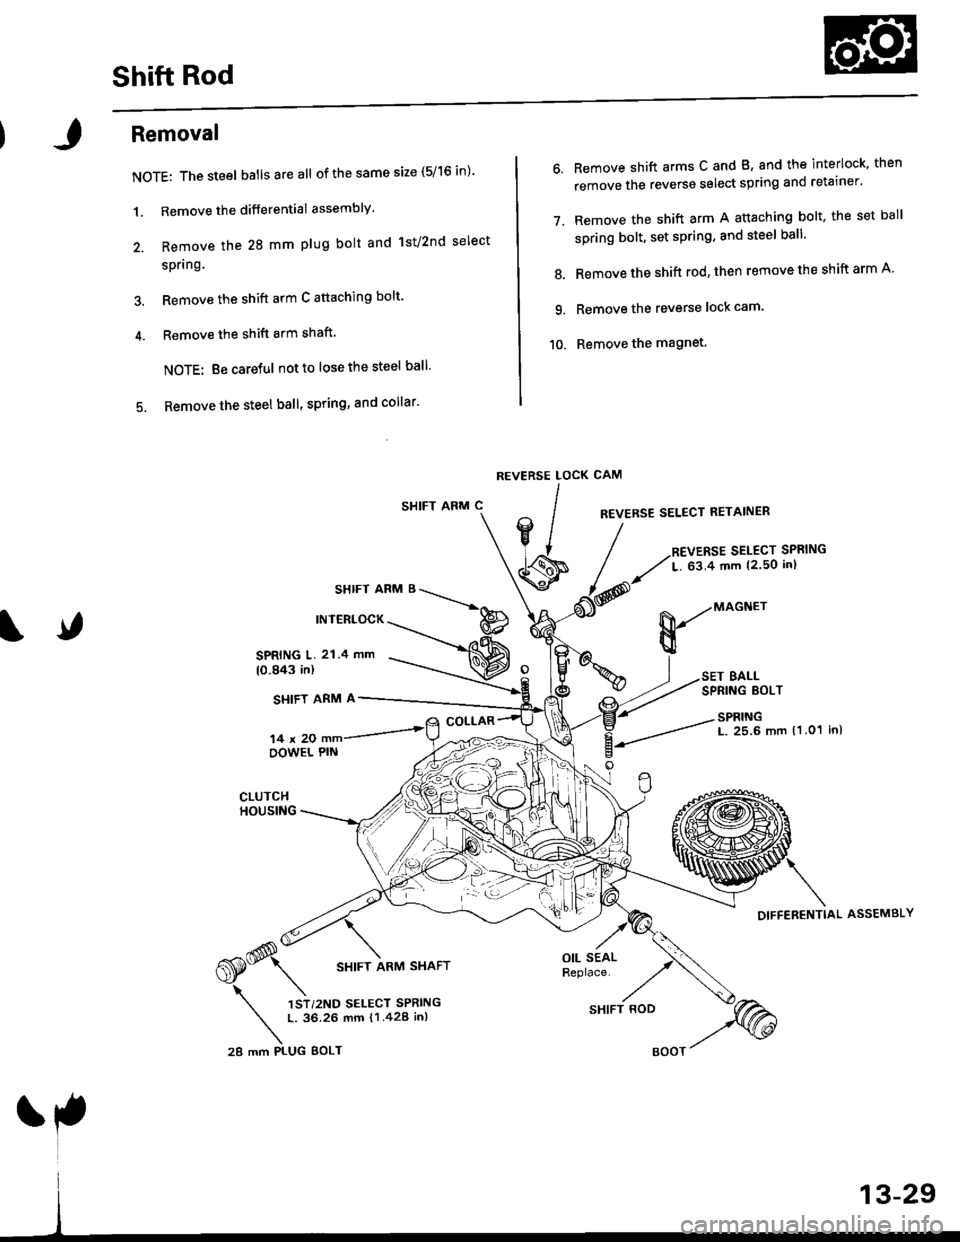 HONDA CIVIC 1996 6.G Workshop Manual Shift Rod
Removal
NOTE: The steel batlsareall of the same size (5/16 in)
1. Remove the differential assembly
2. Remove the 28 mm plug bolt and lst/2nd select
spring.
3. Remove the shift arm C attach